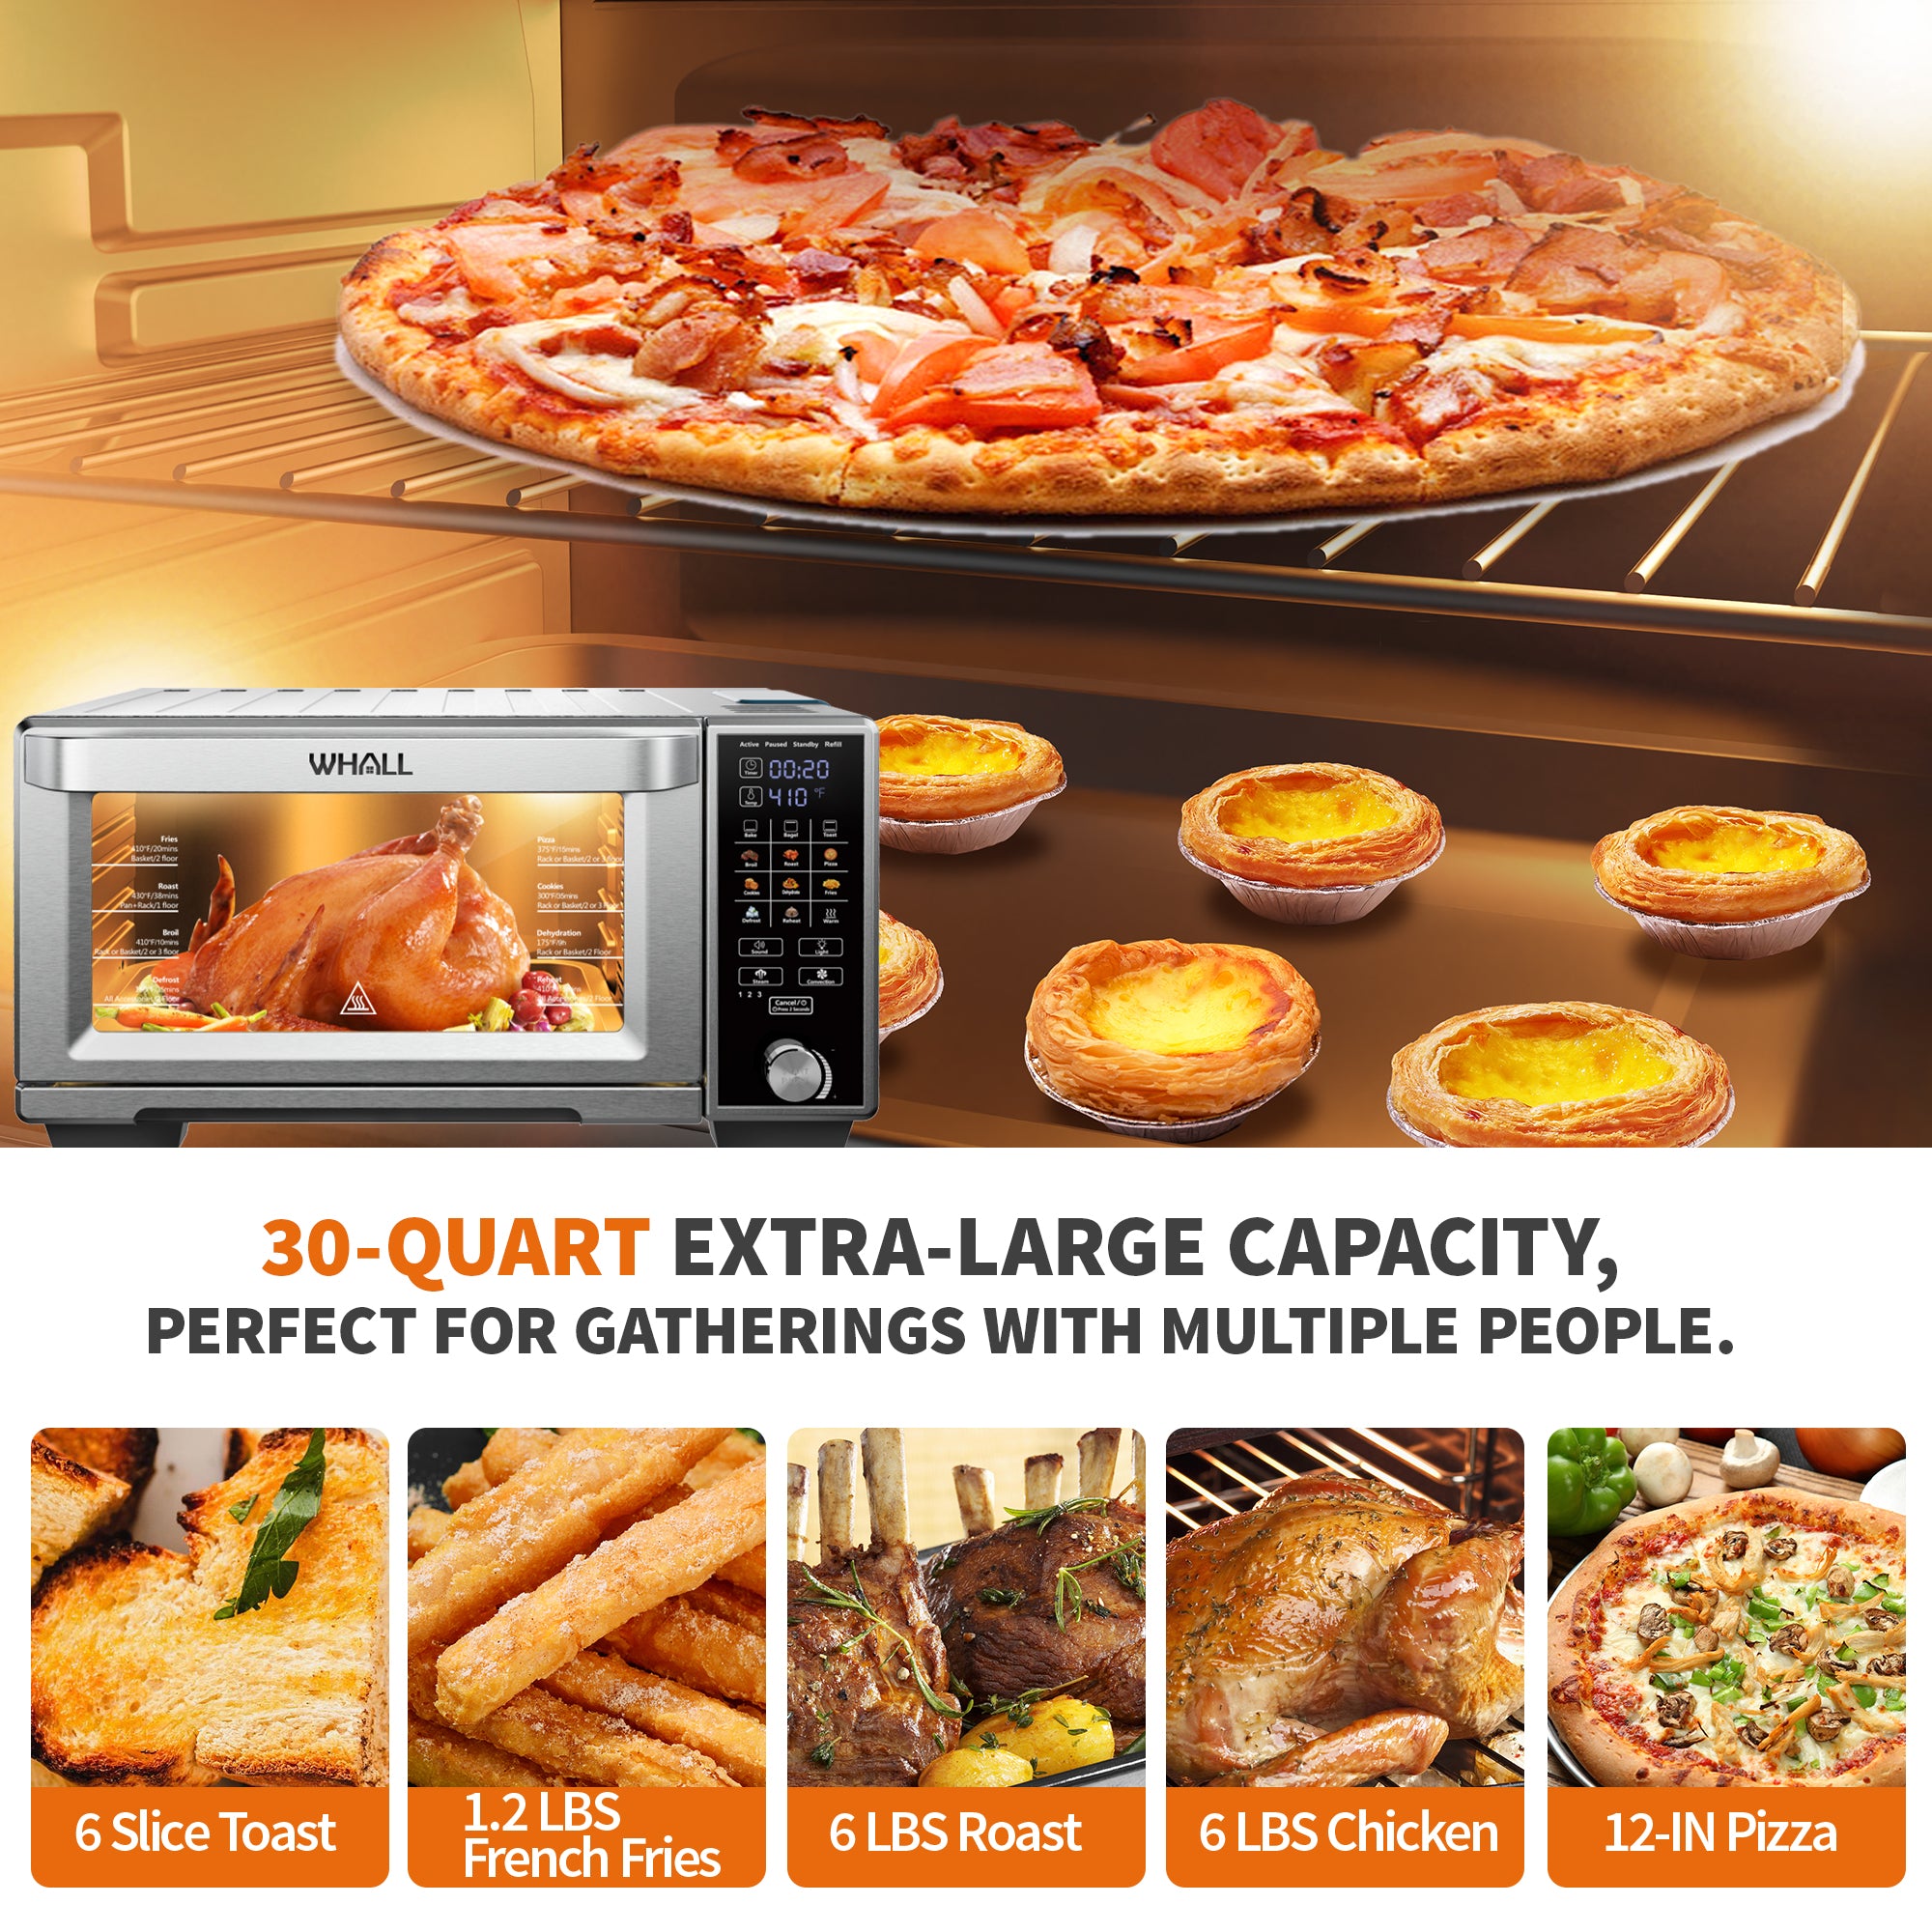 WHALL Air Fryer Toaster Oven - 30QT Convection Oven, 11-in-1 Steam Oven, Touchscreen, 4 Accessories